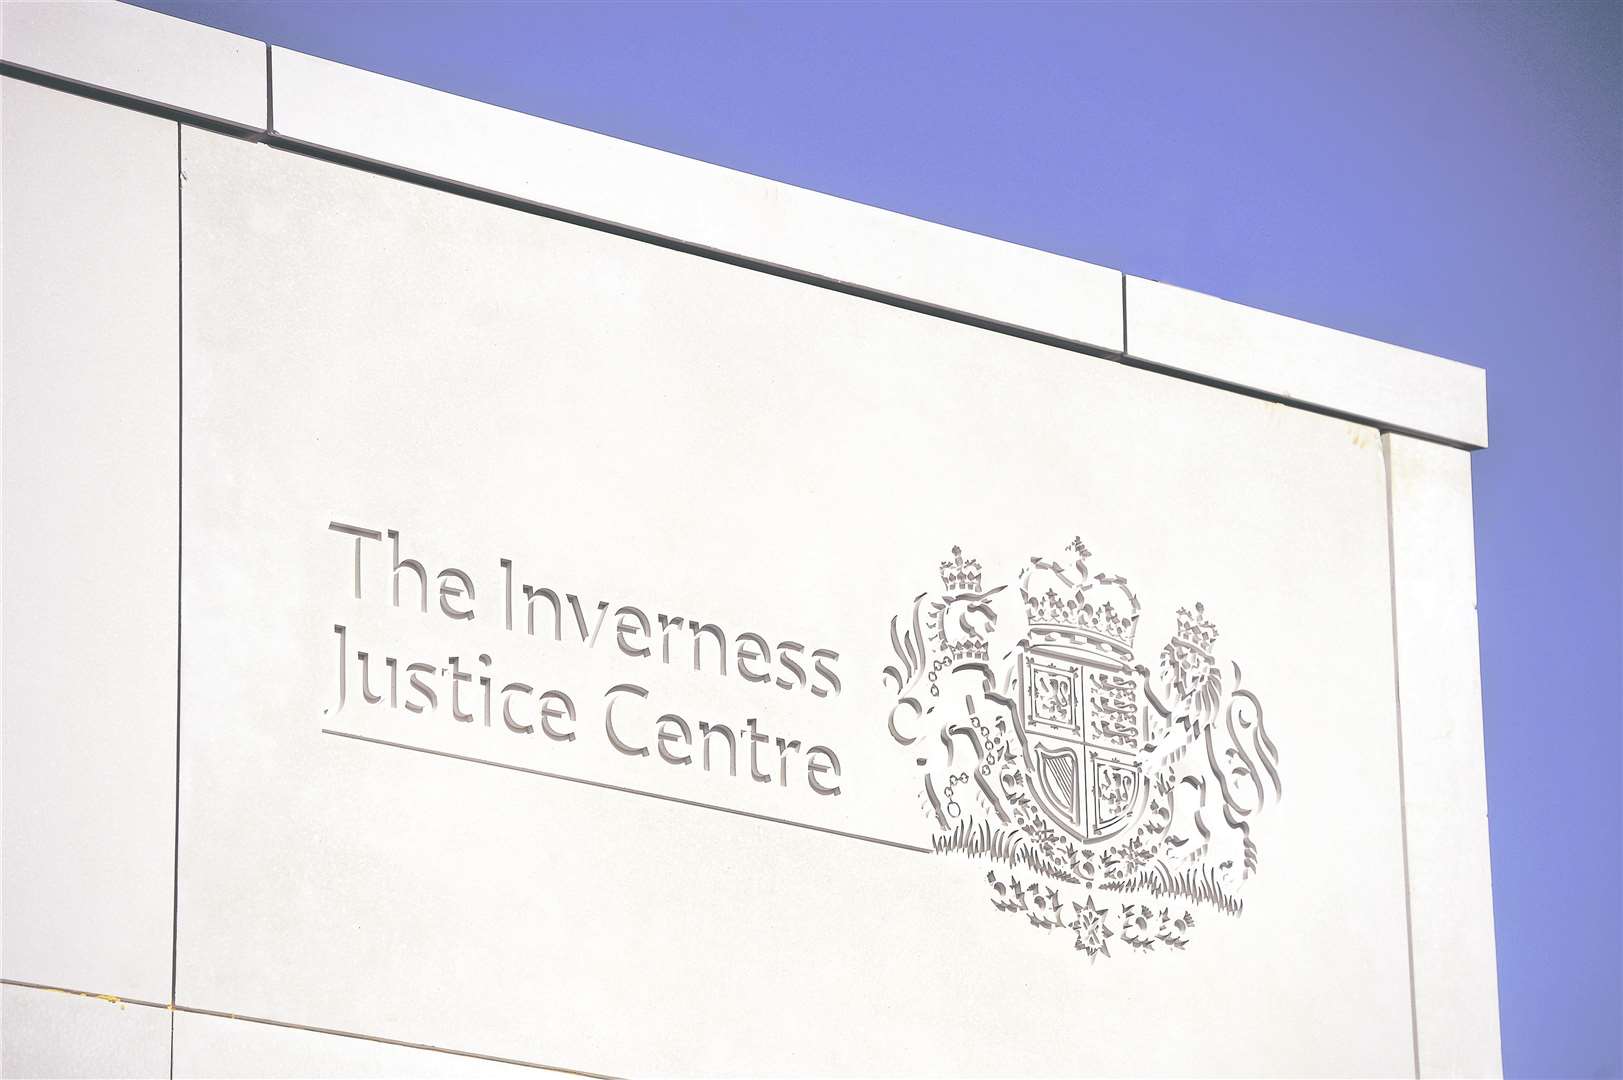 The Inverness Justice Centre.